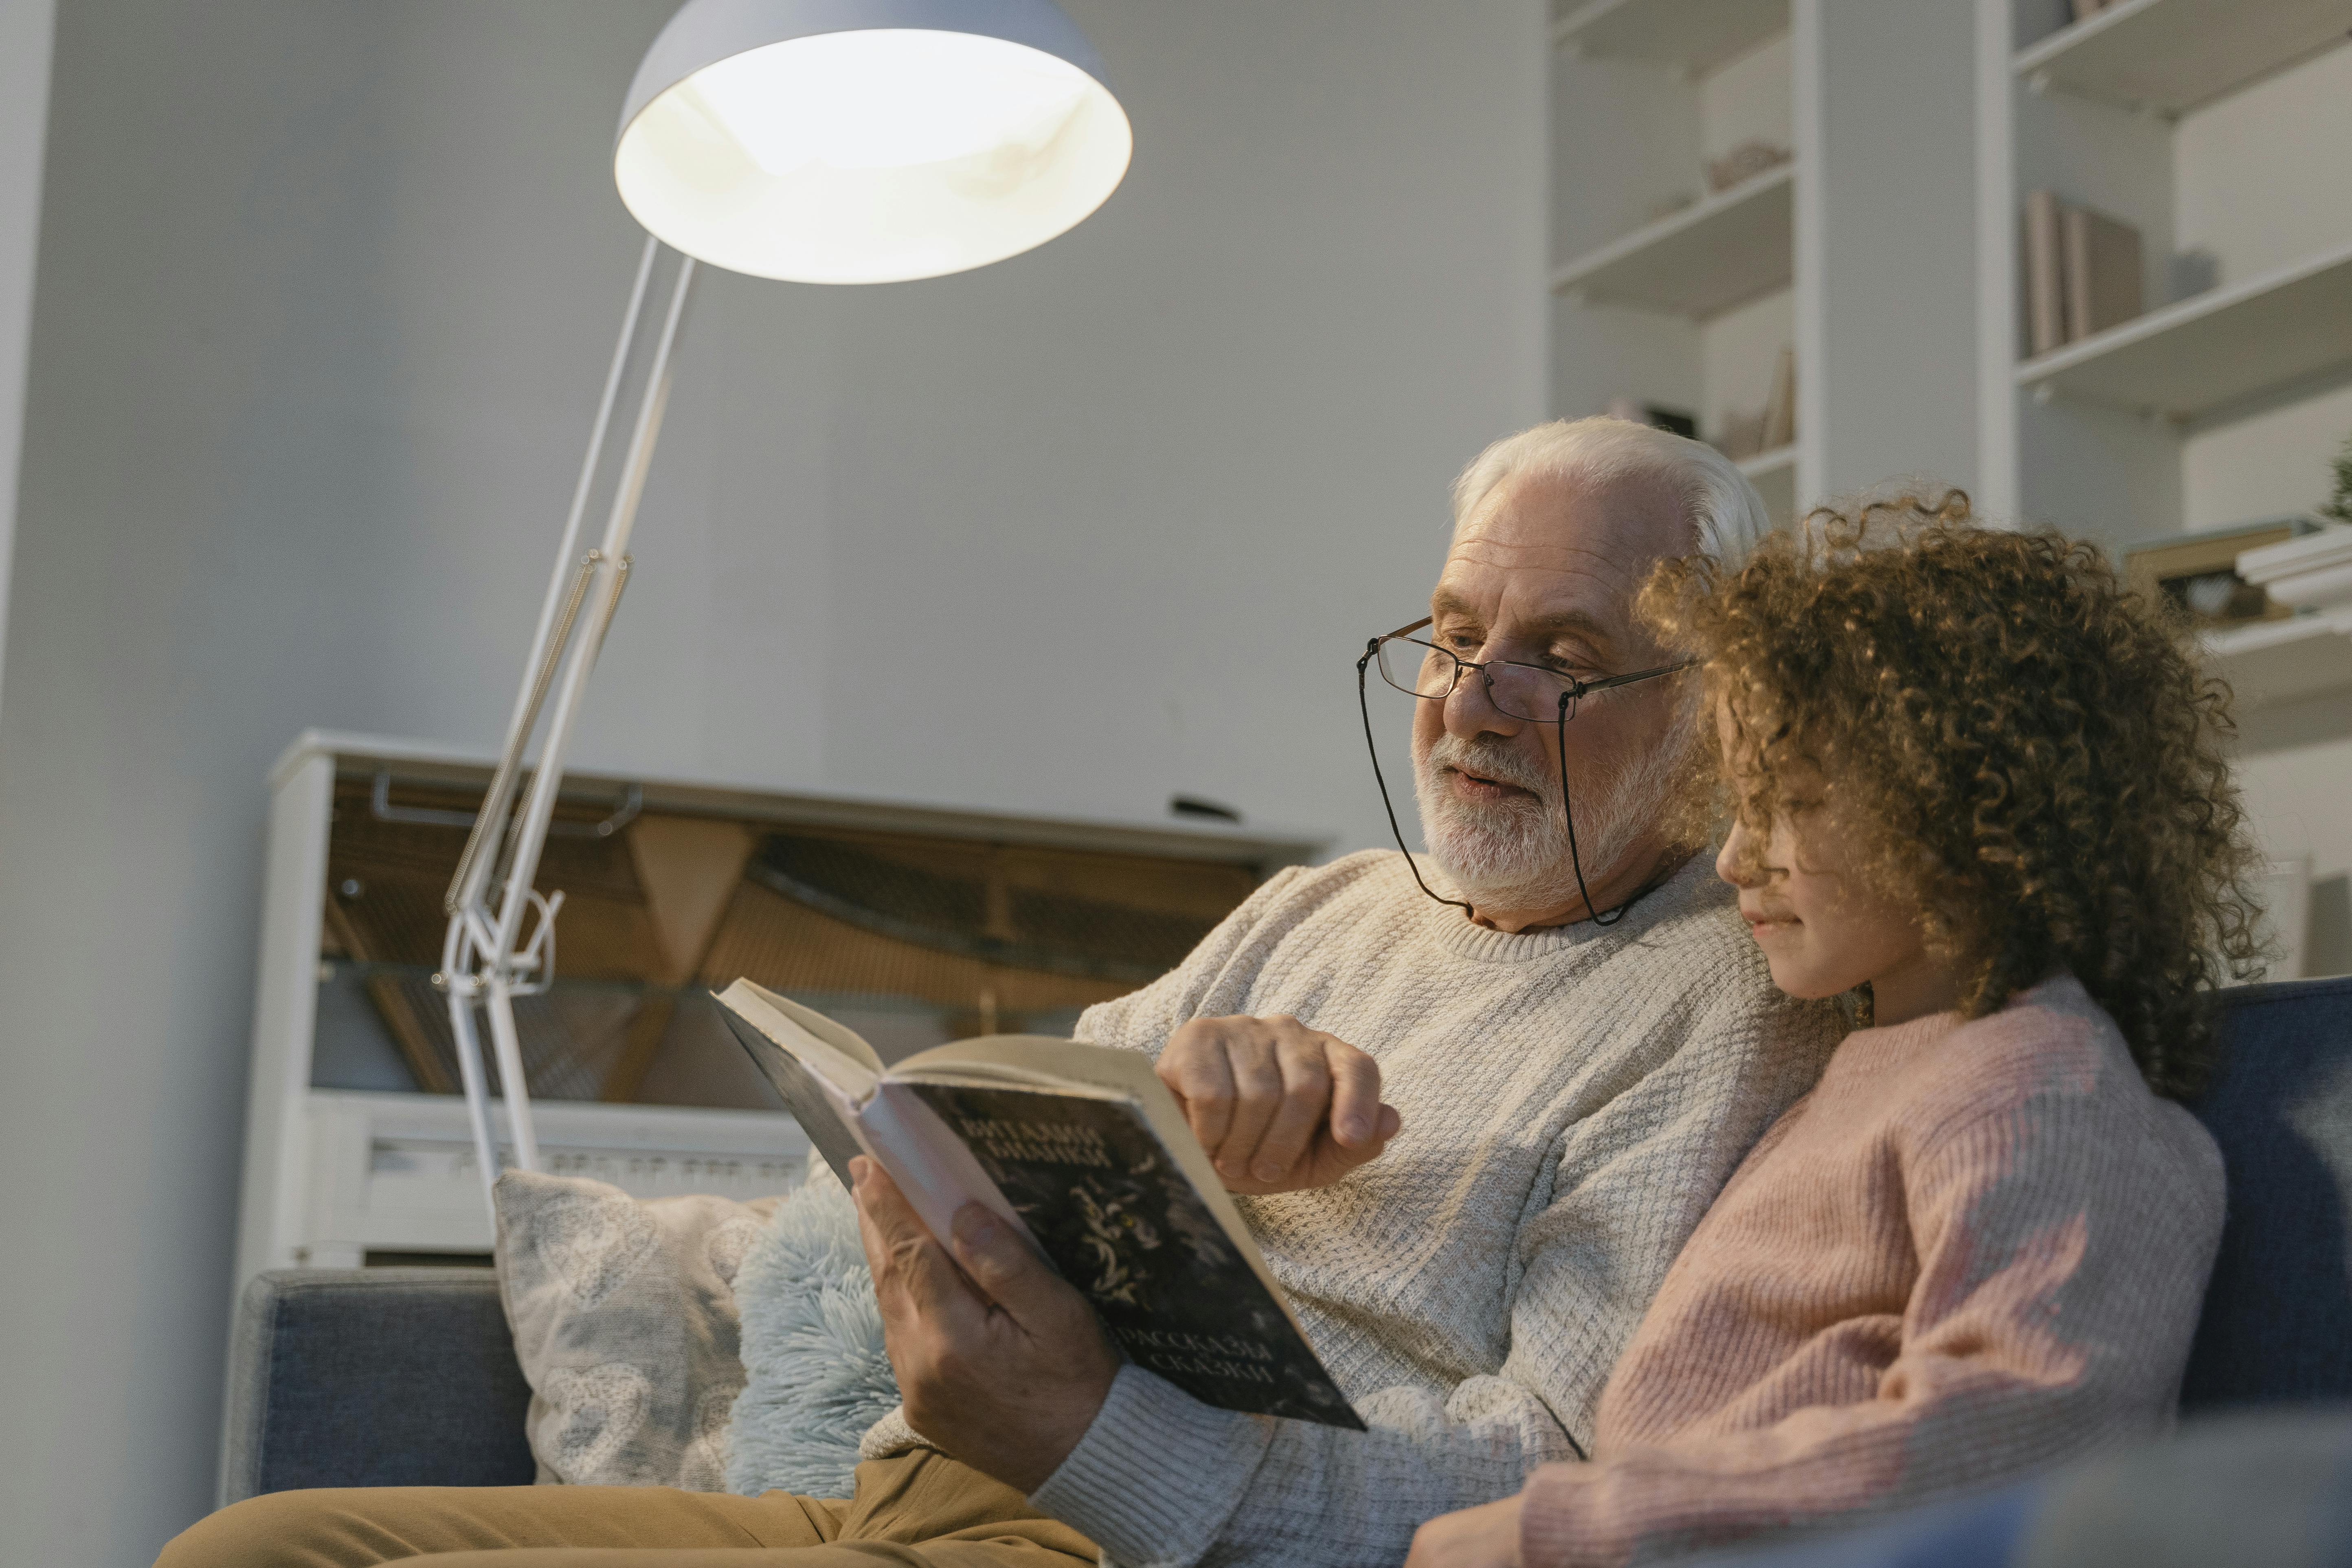 A grand father reading a book to his granddaughter | Source: Pexels